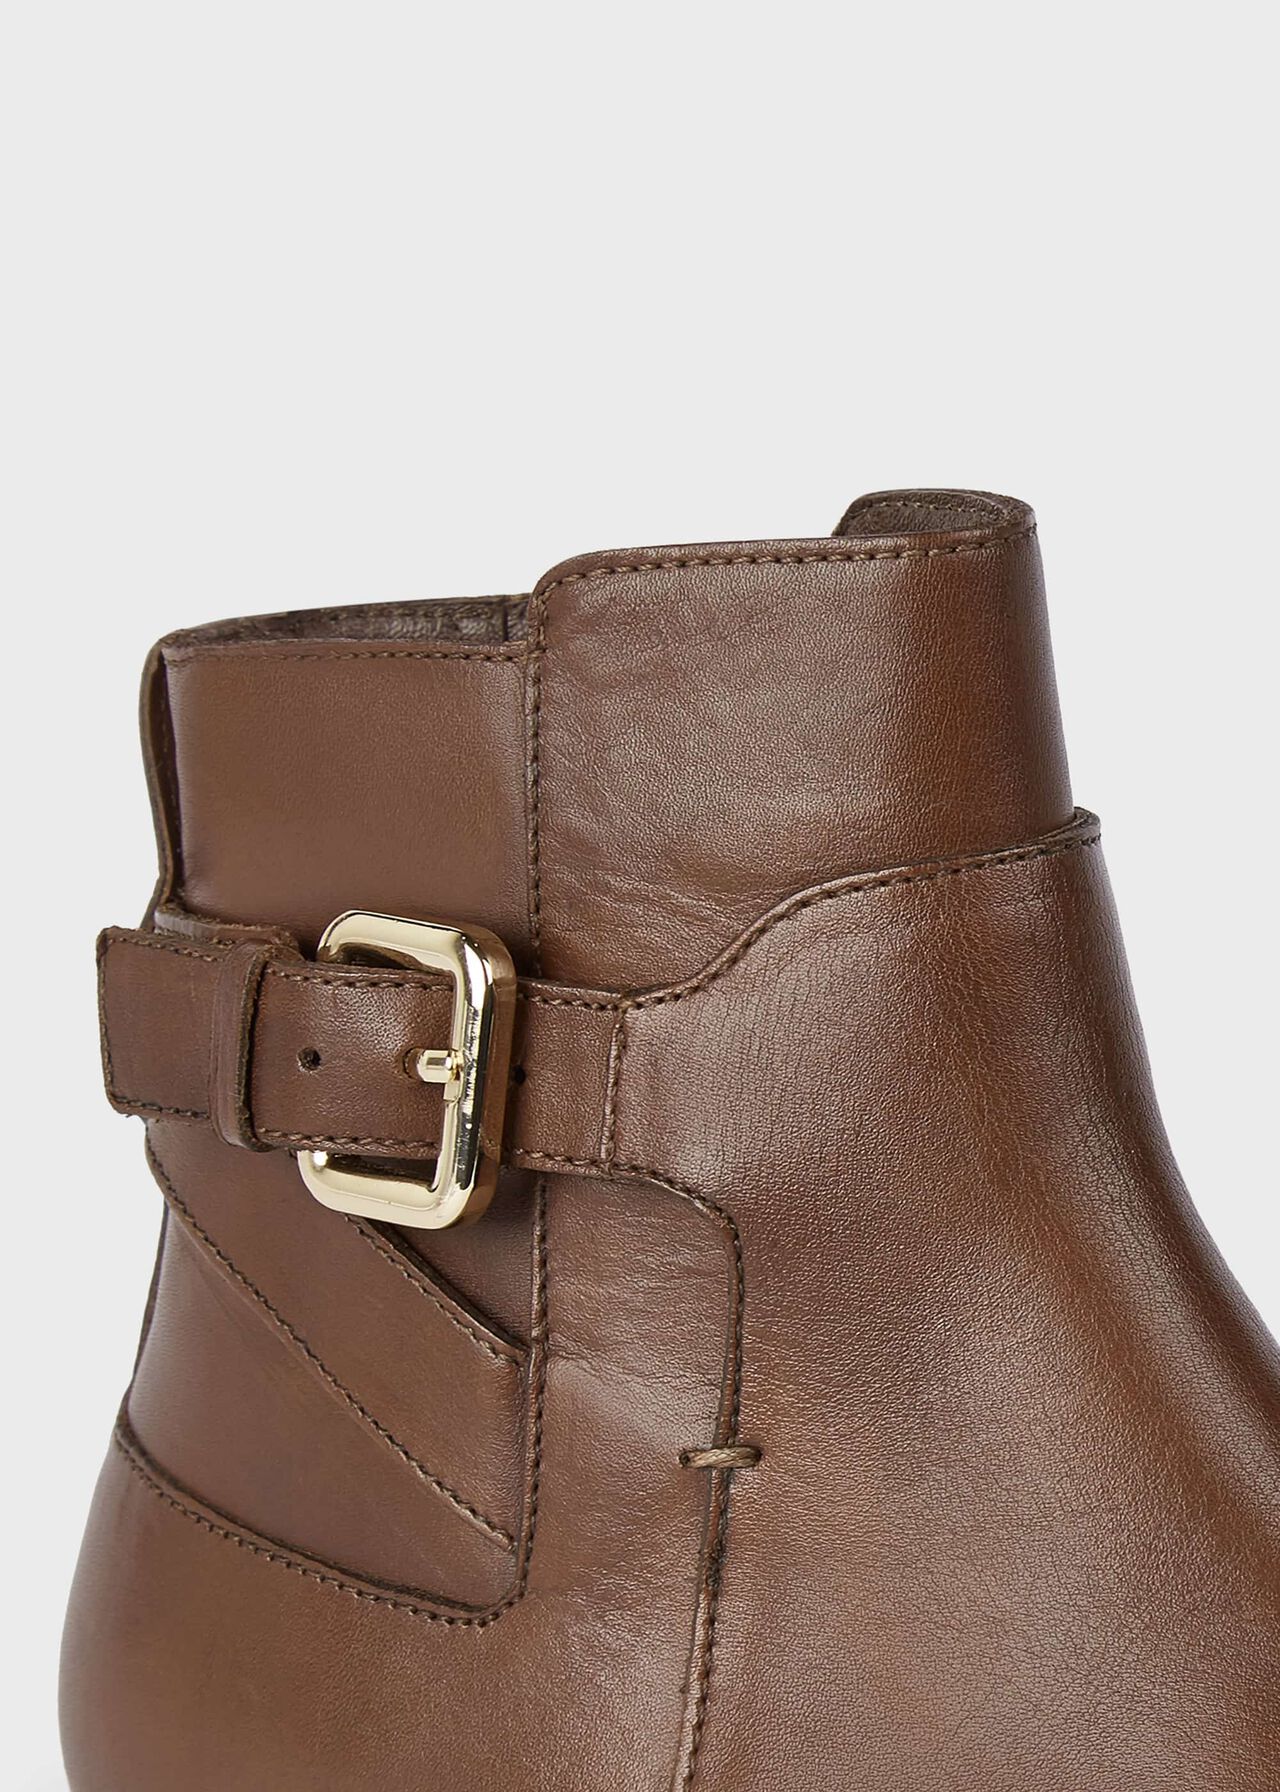 Zoe Leather Ankle Boots, Chestnut, hi-res